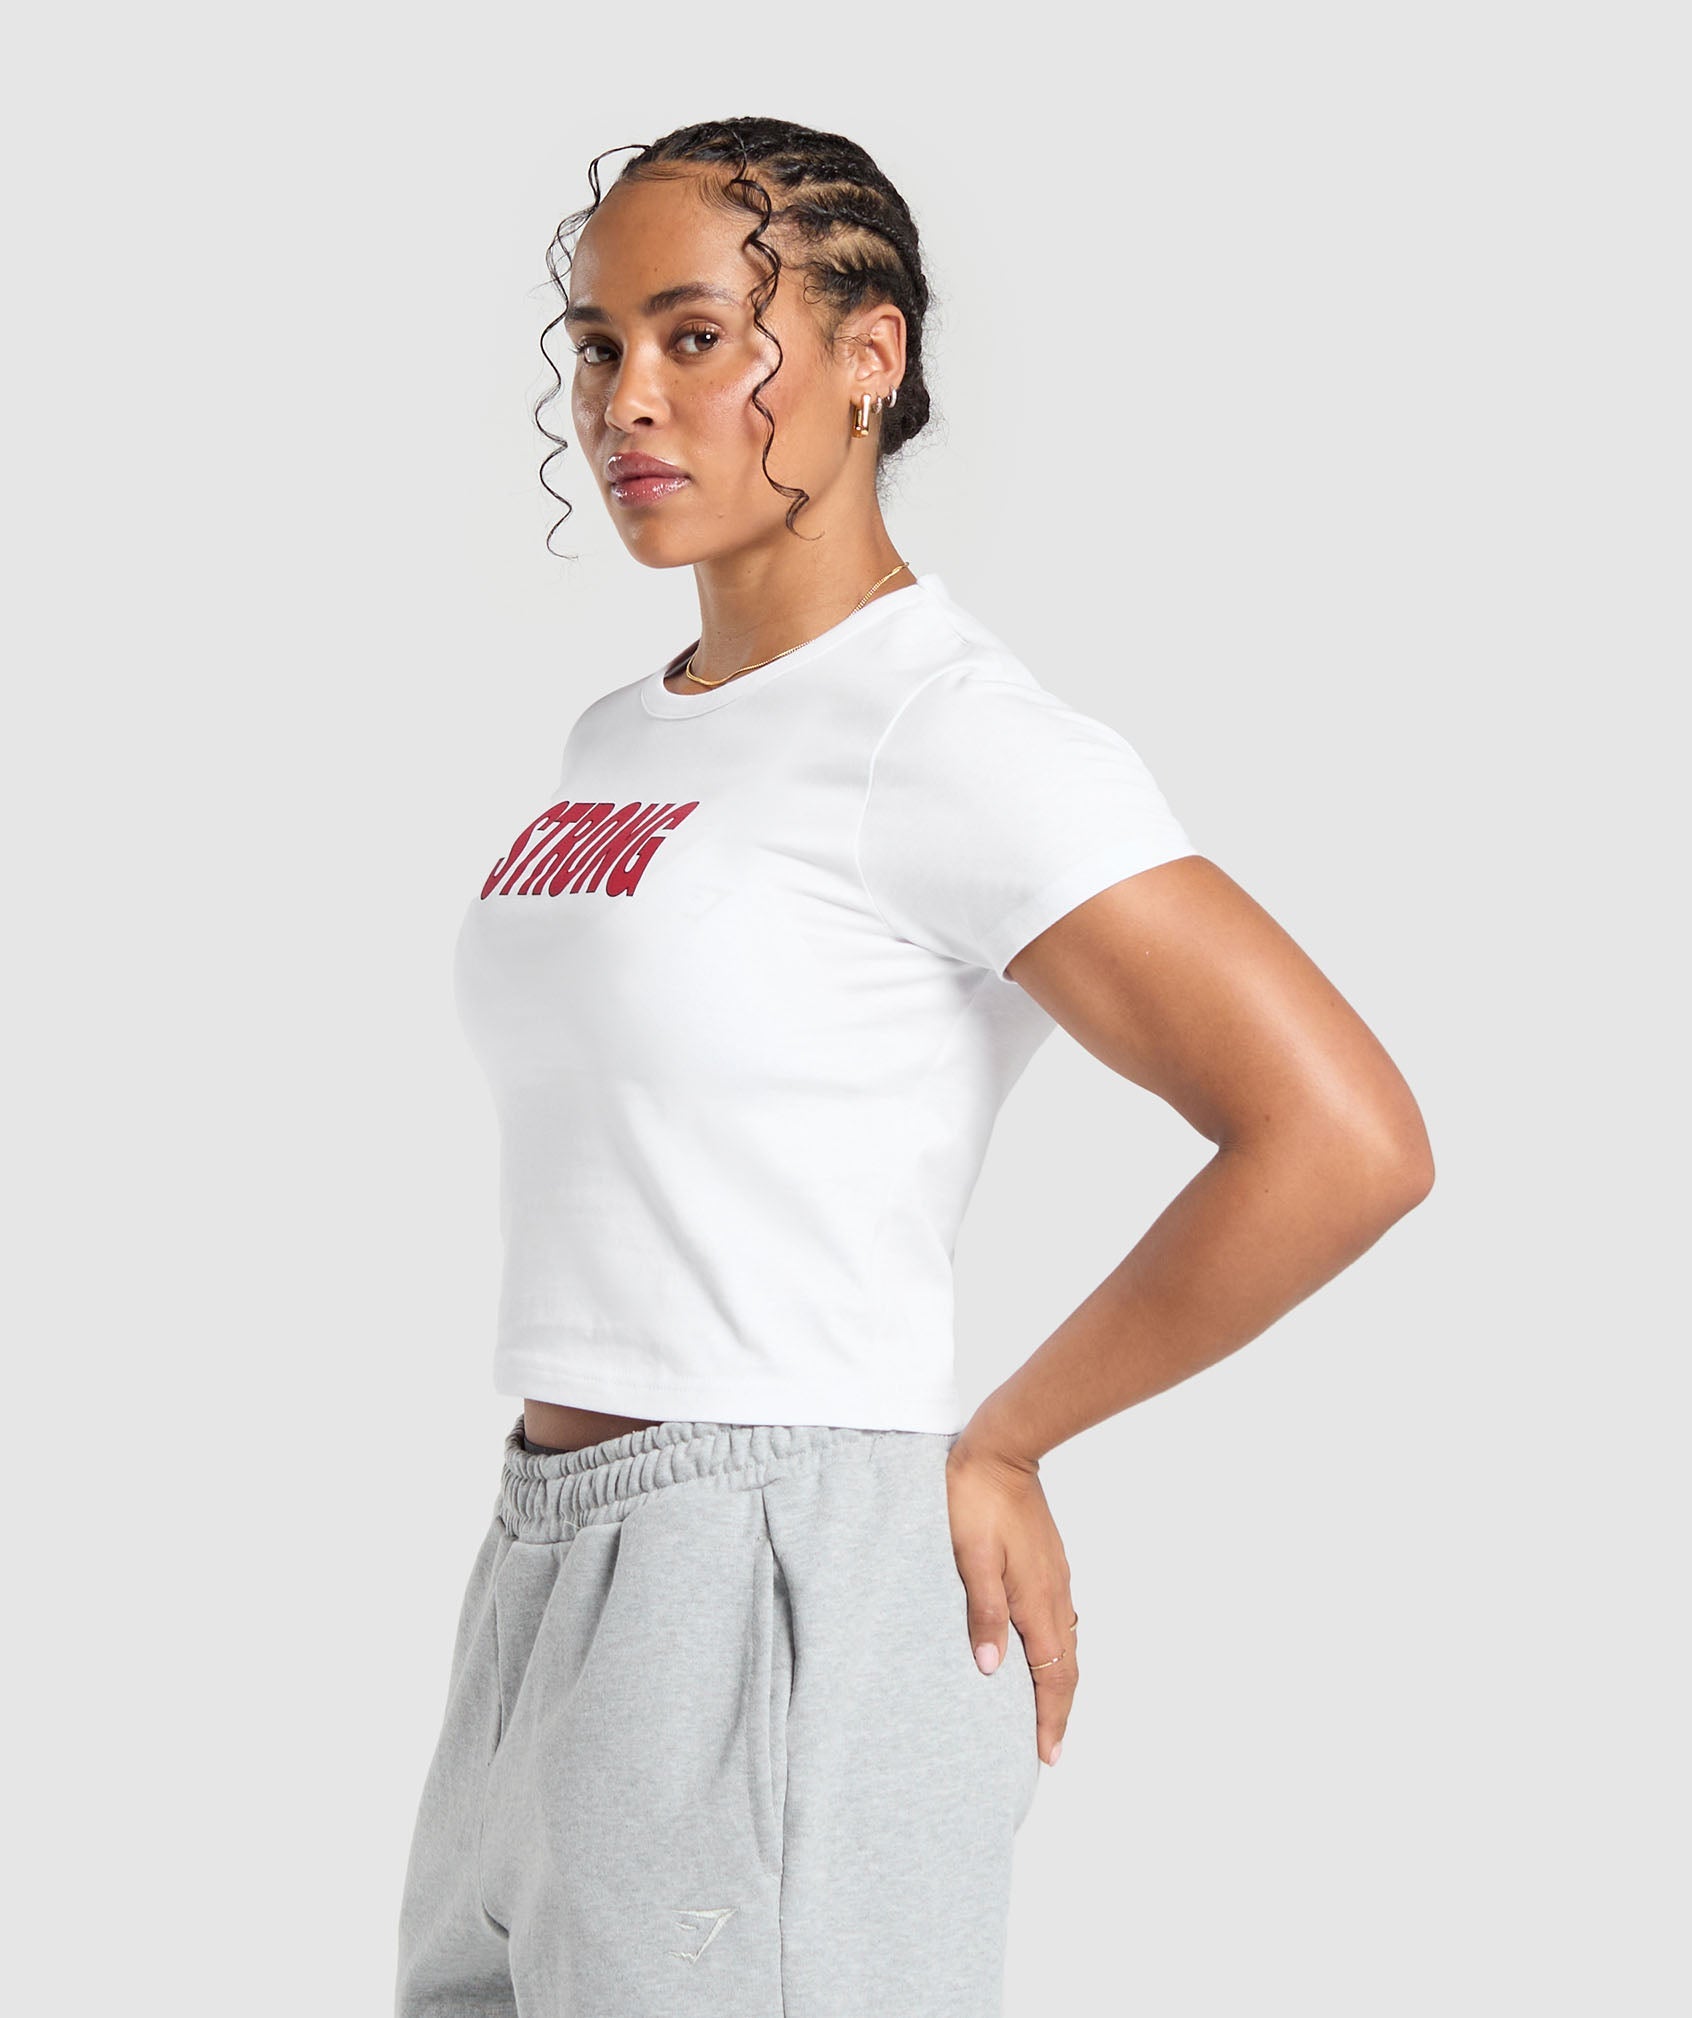 Strong Lifter Baby Tee in White - view 3